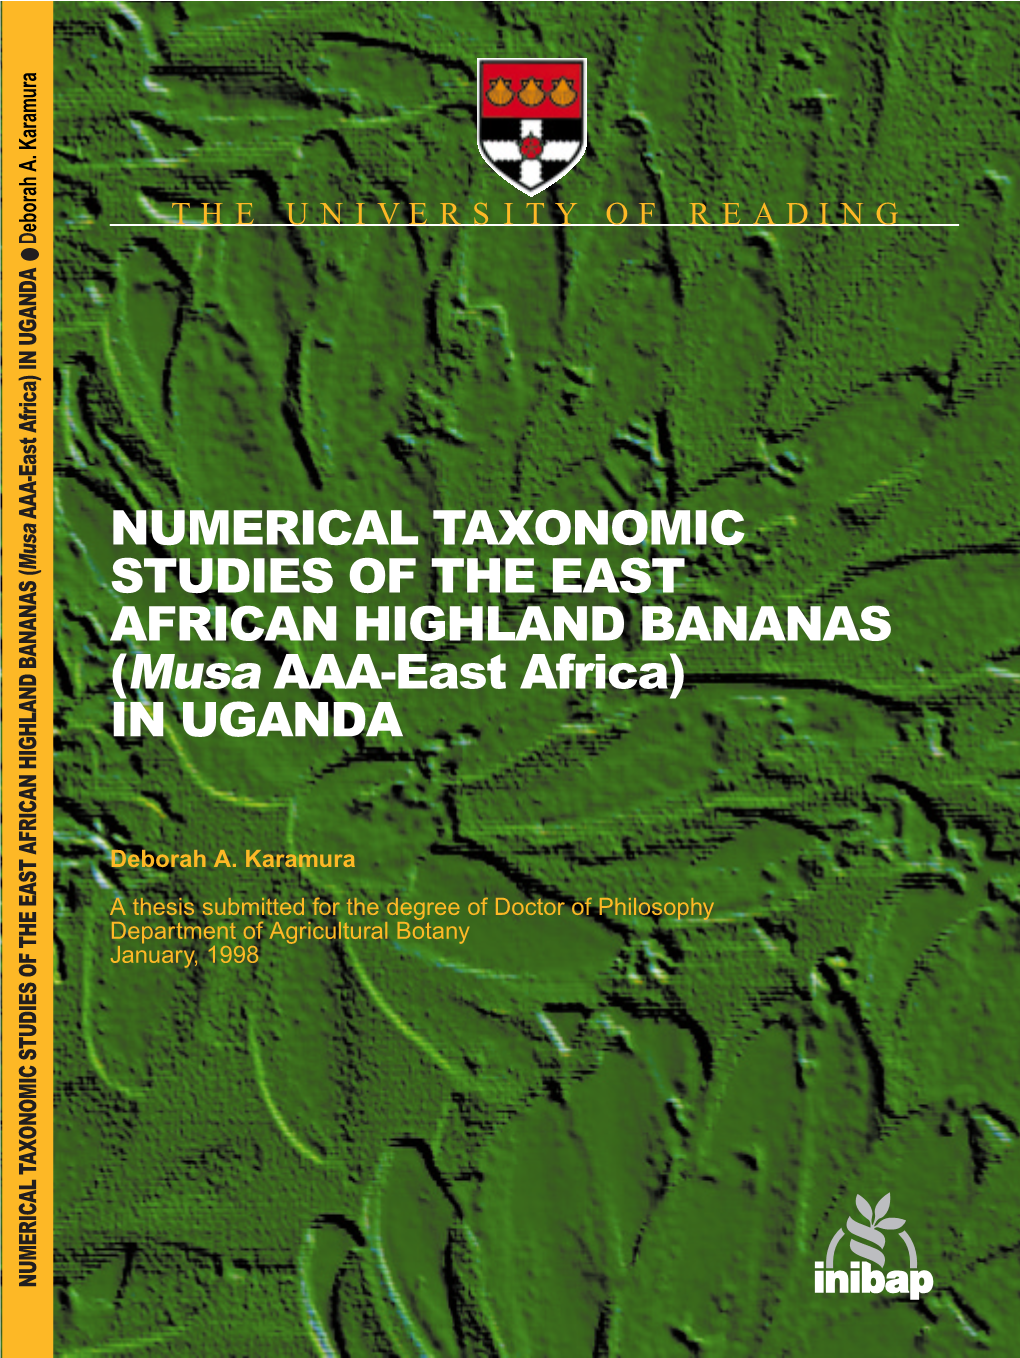 Numerical Taxonomic Studies of the East African Highland Bananas (Musa AAA-East Africa) in Uganda